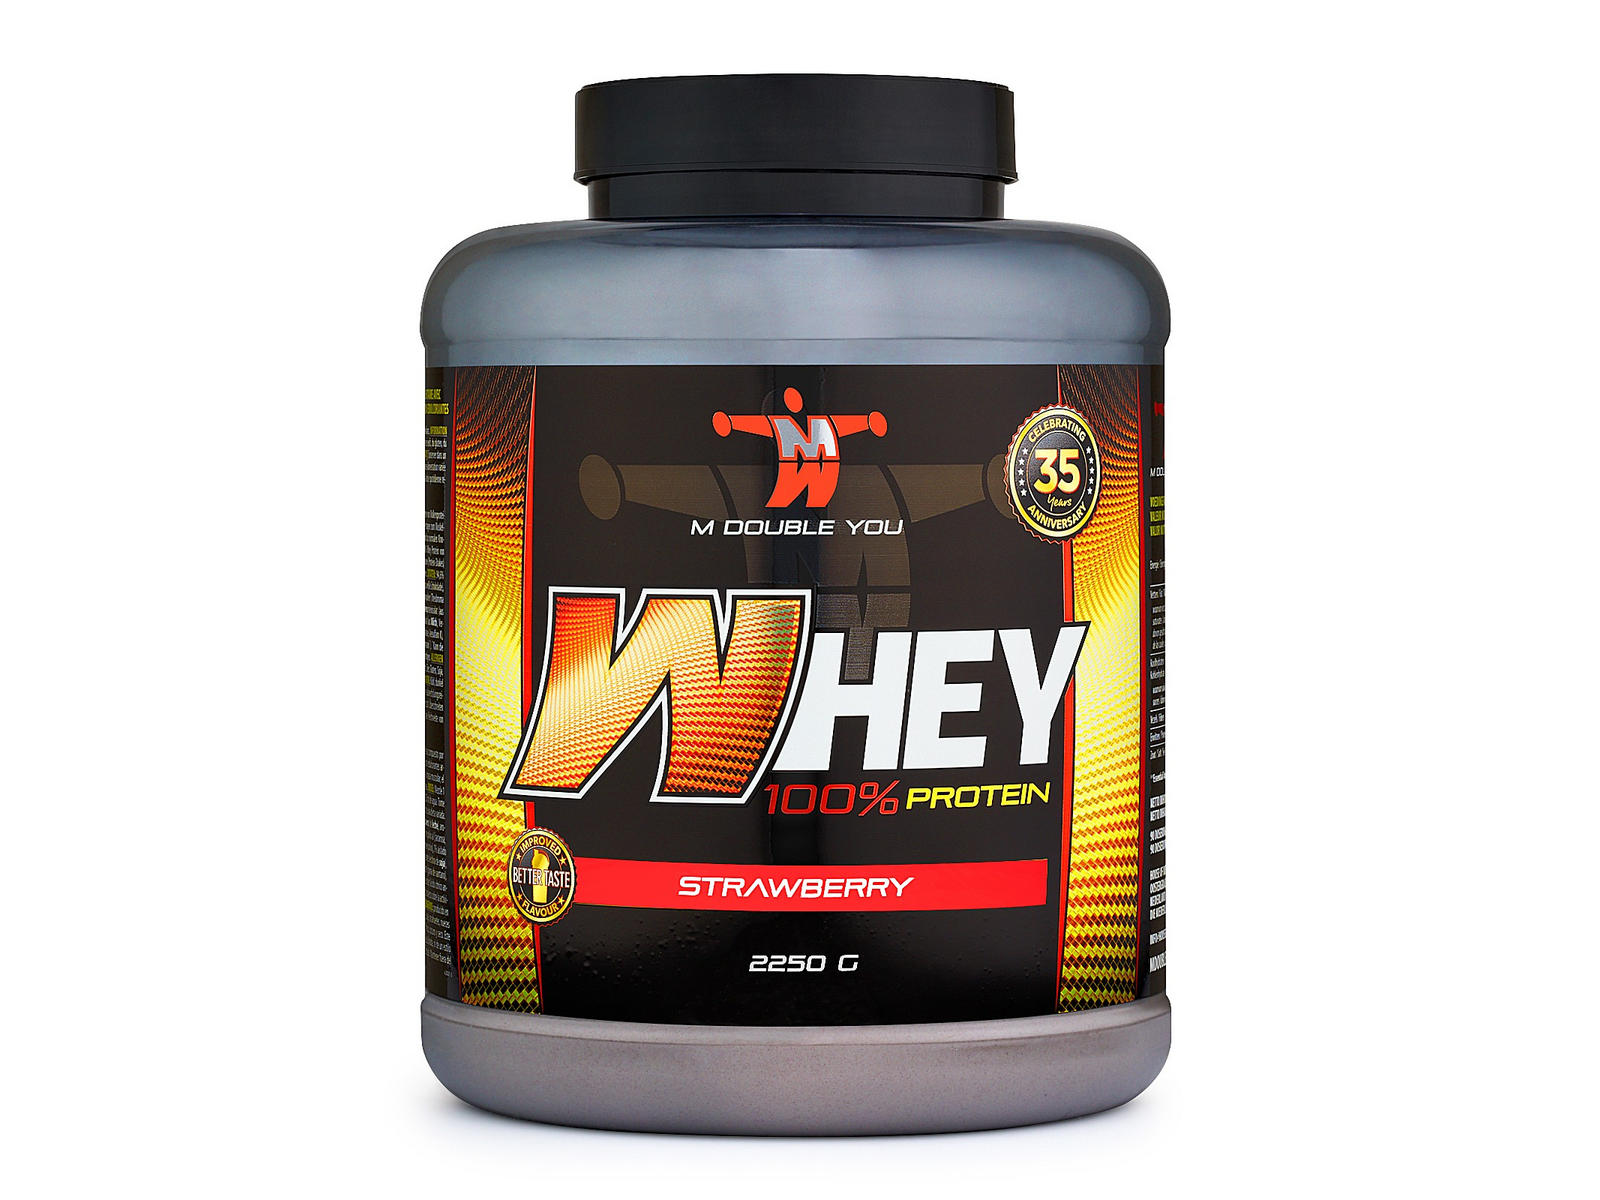 100% Whey Protein (Strawberry - 2250 gram) - M DOUBLE YOU